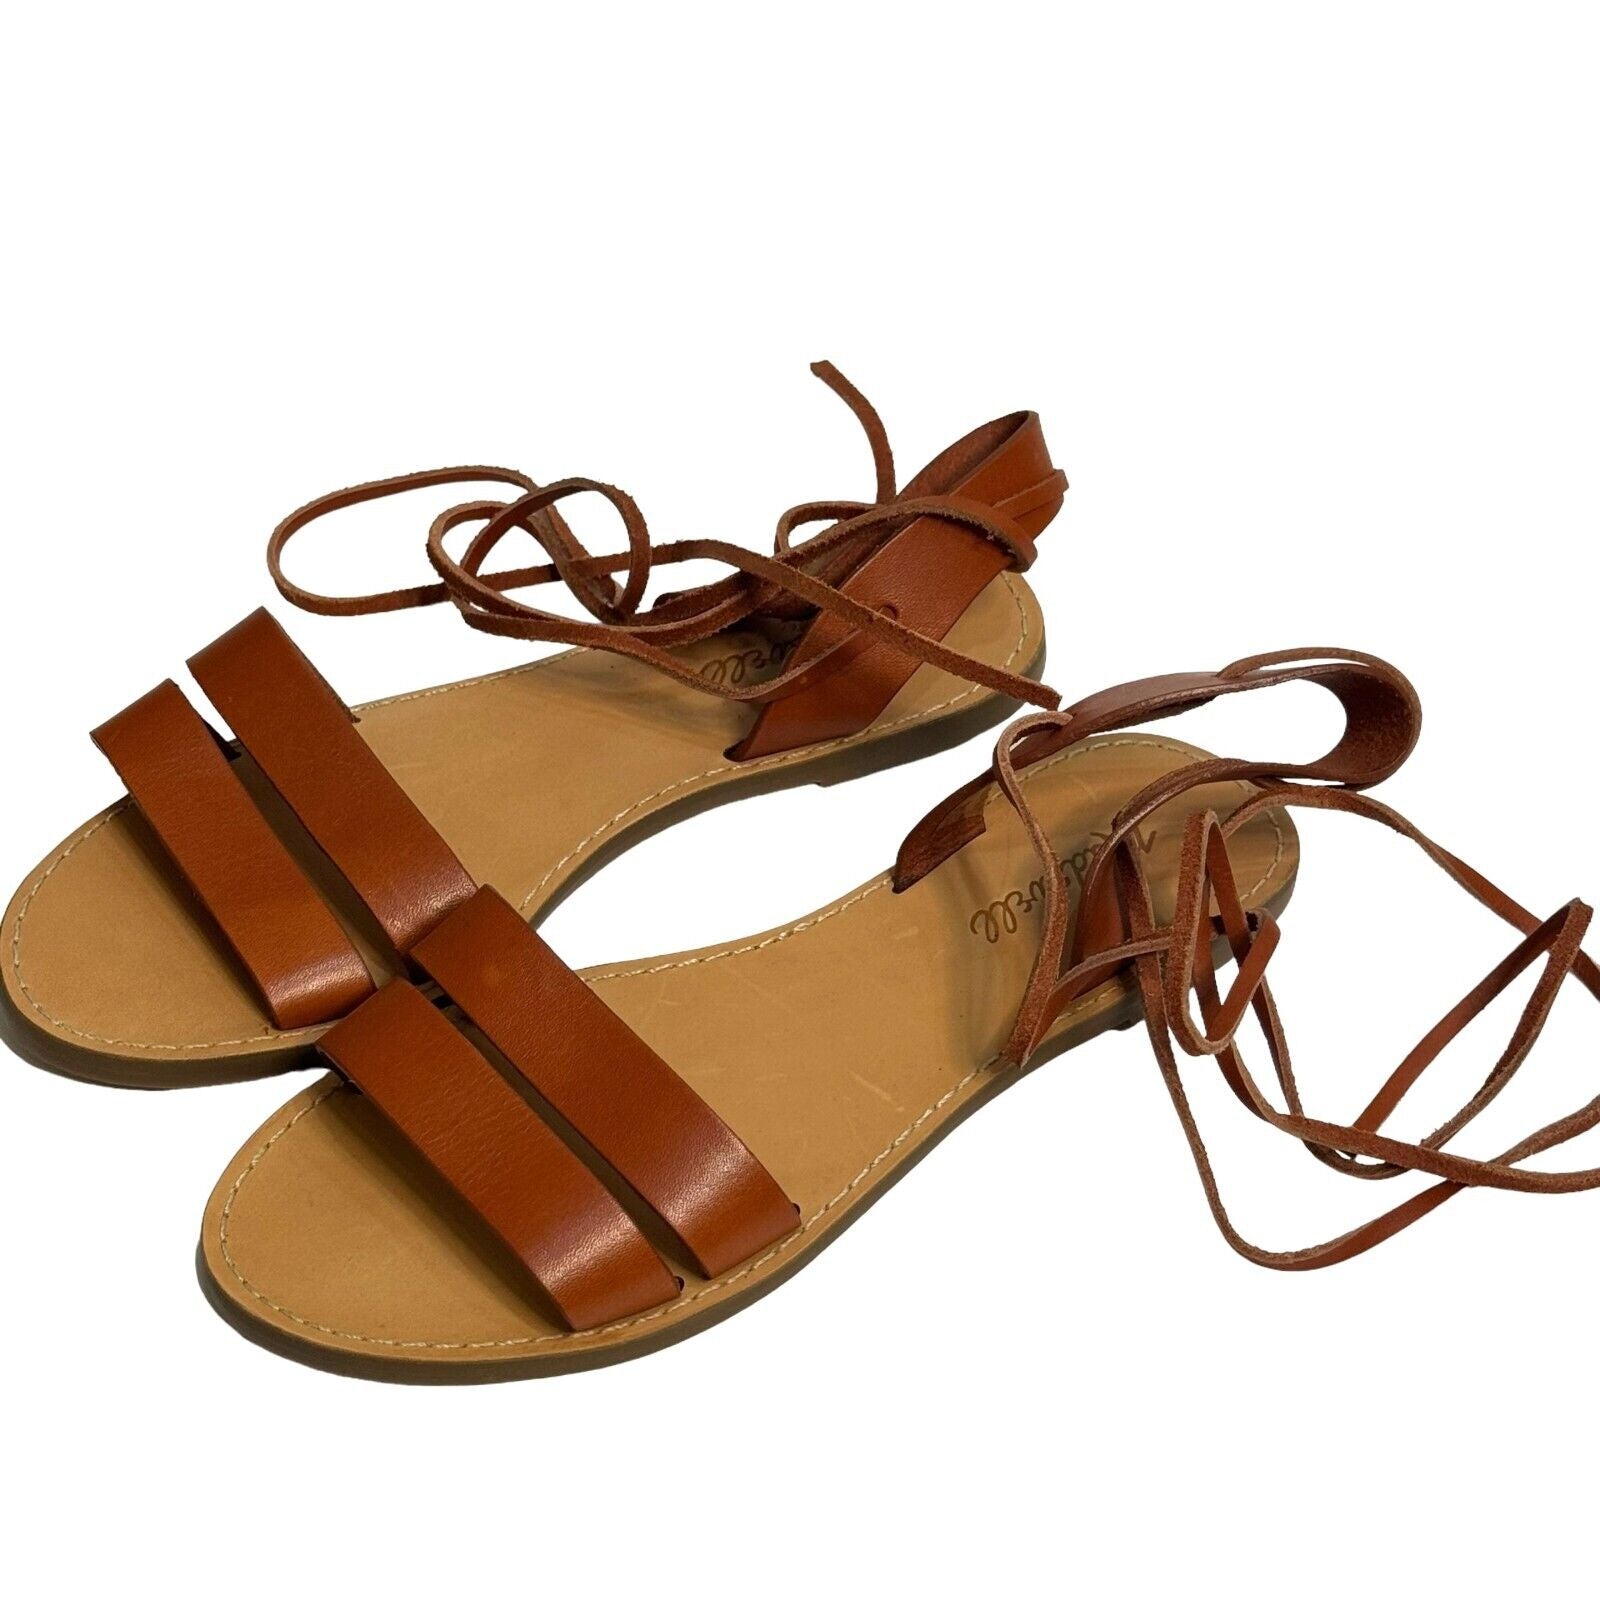 Madewell The Boardwalk Ankle-Tie Leather Sandals Size 7